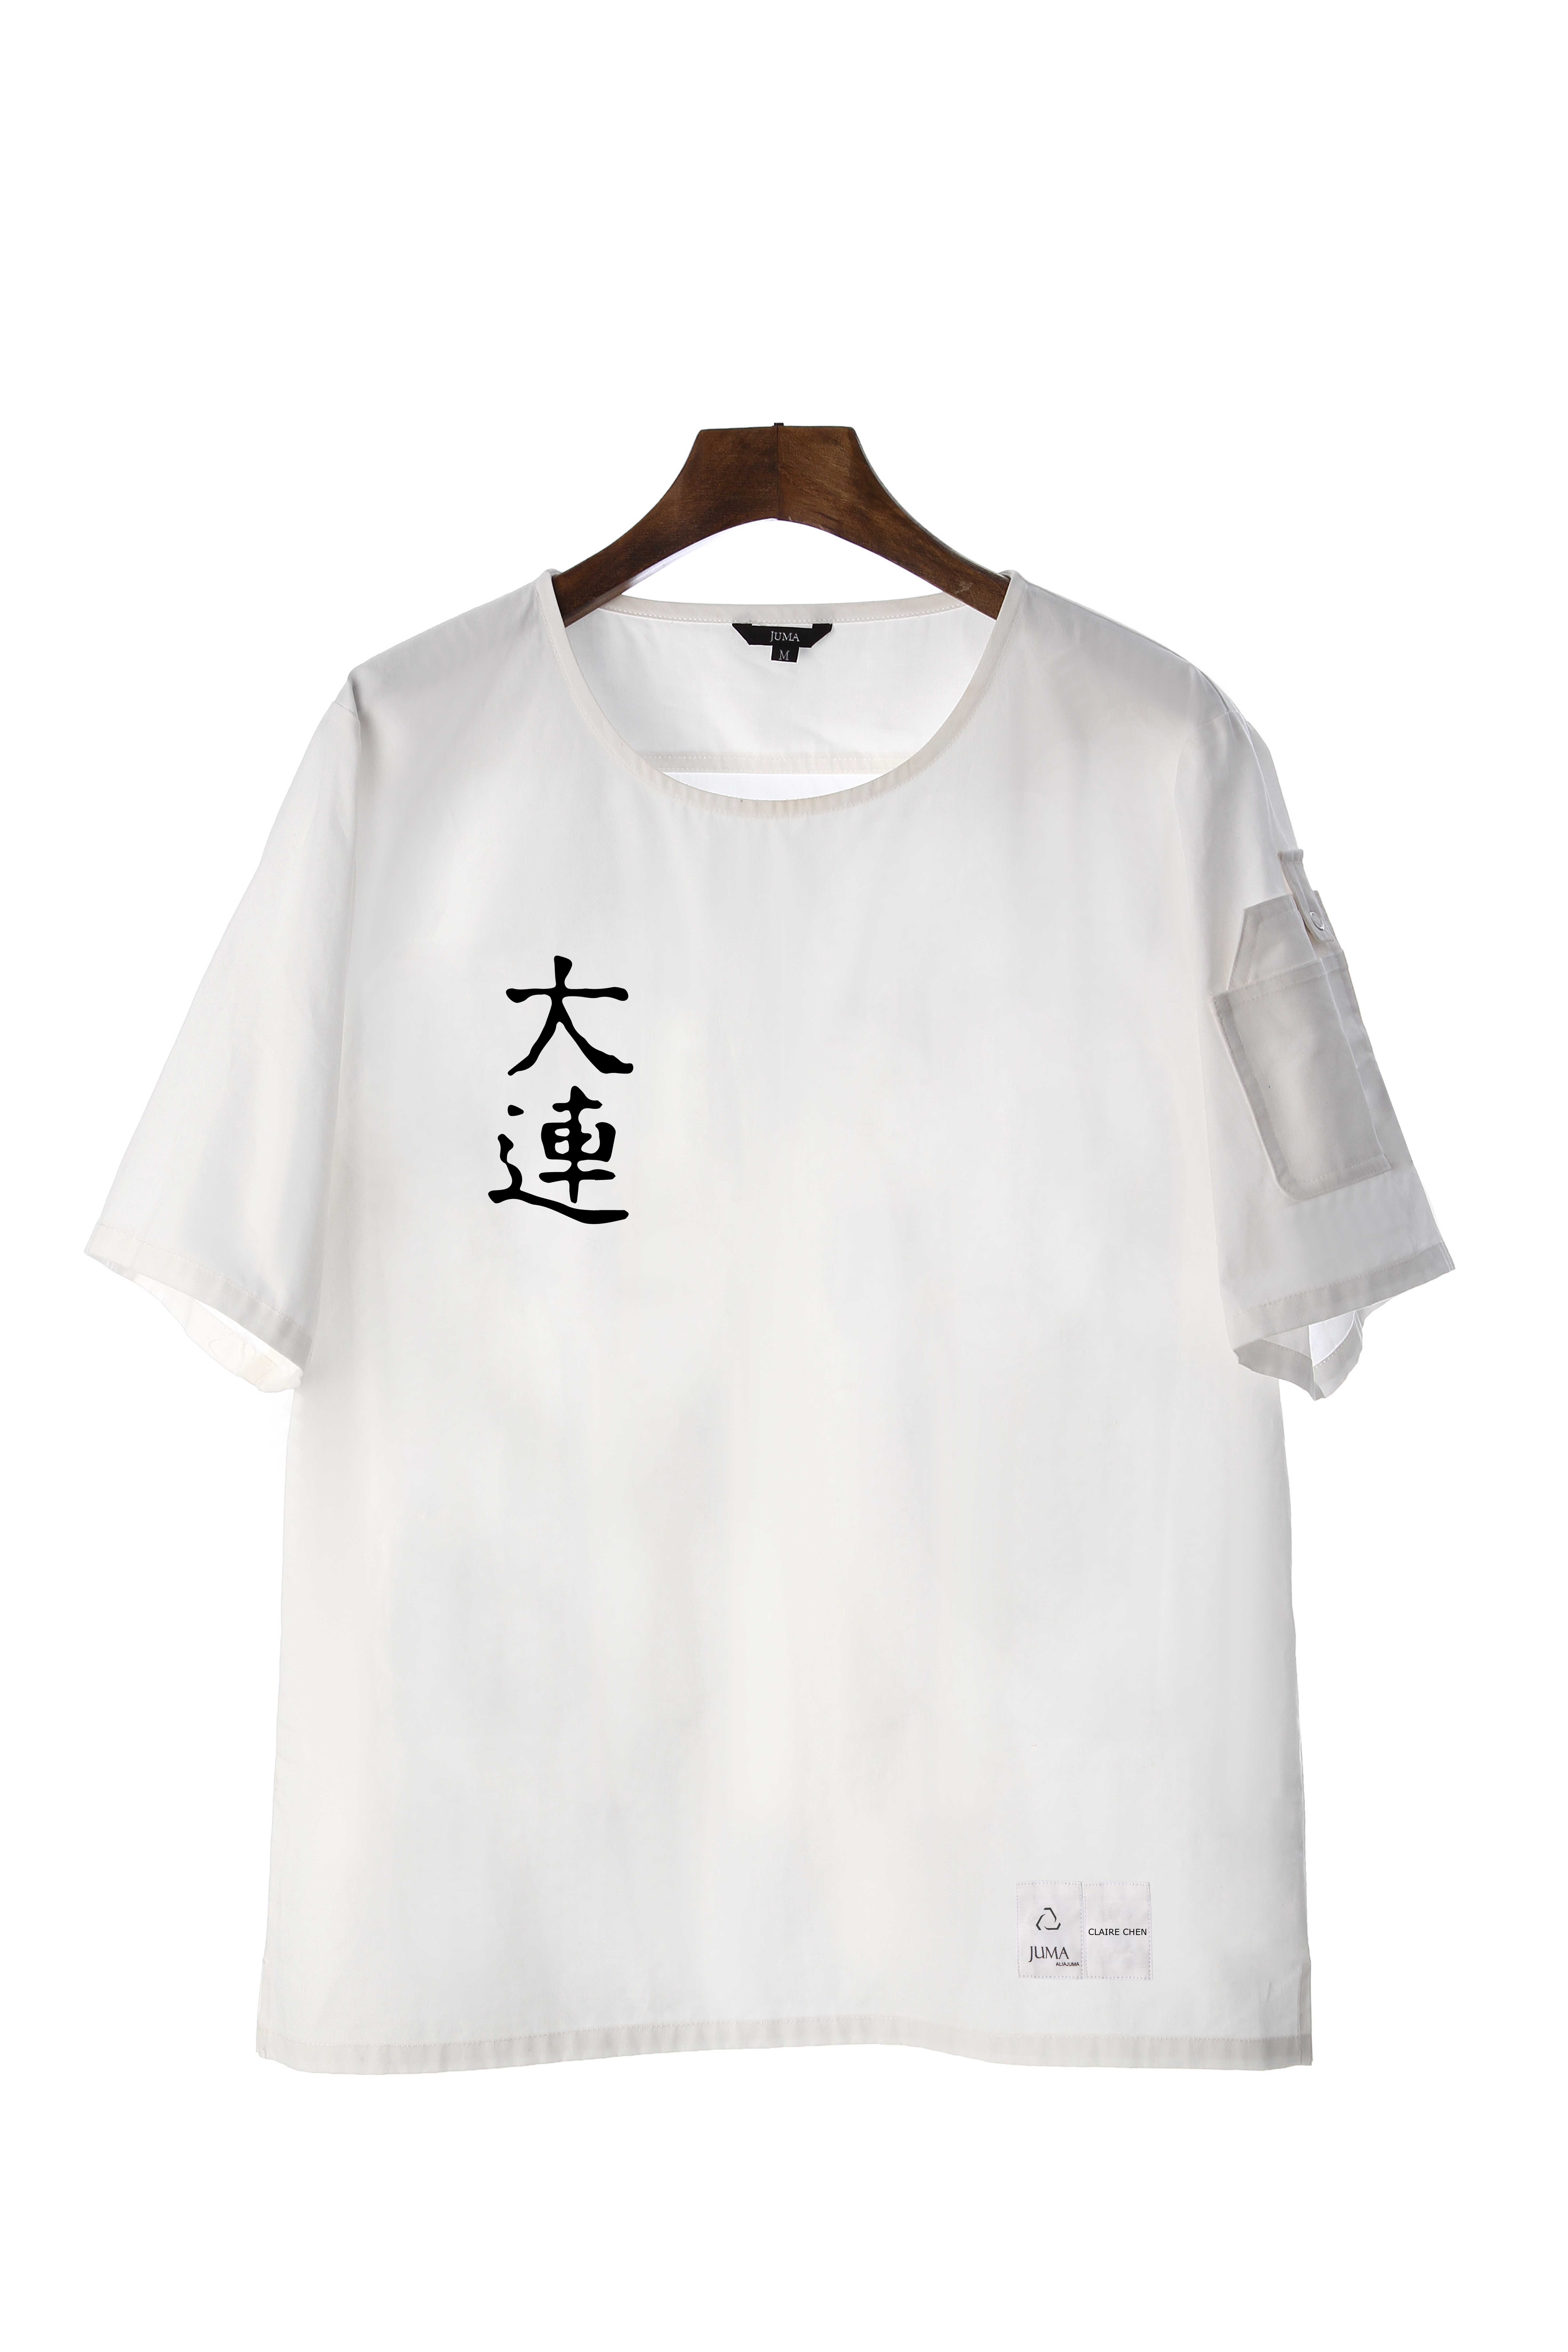 Claire Chen 短袖上衣-4个回收水瓶-白色｜Claire Chen Short Sleeve Shirt - 4 Recycled Water Bottles - White